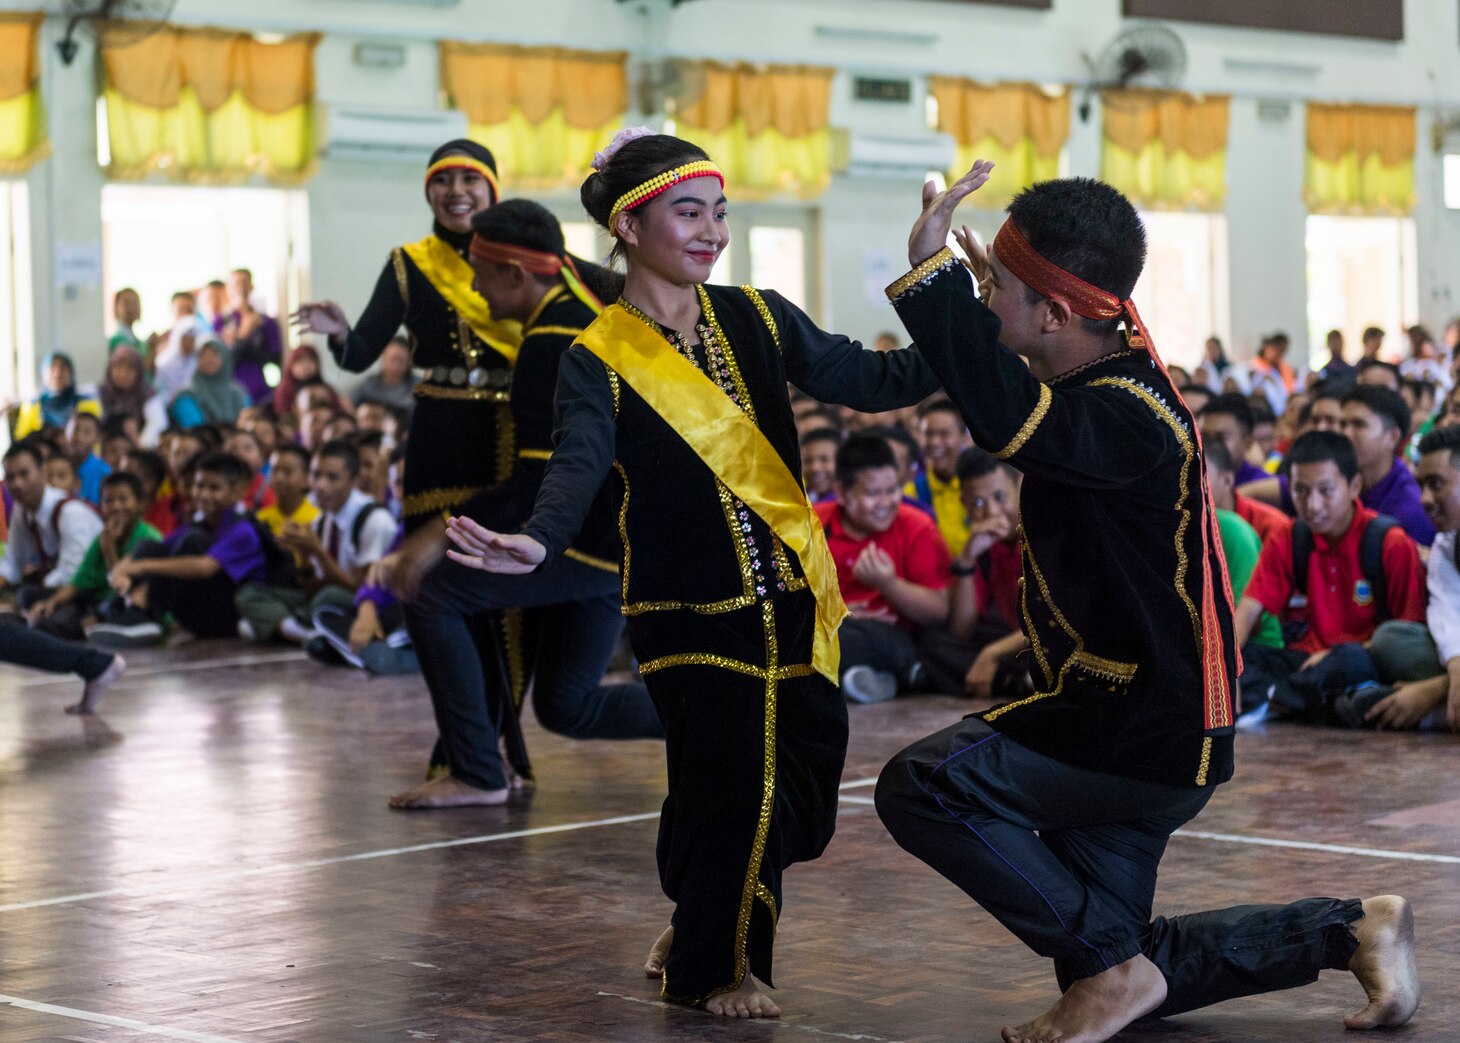 190225-N-WI365-1229 KOTA KINABALU, Malaysia (Feb. 25, 2019) – Students from the Sekolah Menengah Kebangsaan Inanam High School perform a traditional Malaysian dance during a cultural exchange and community service event.